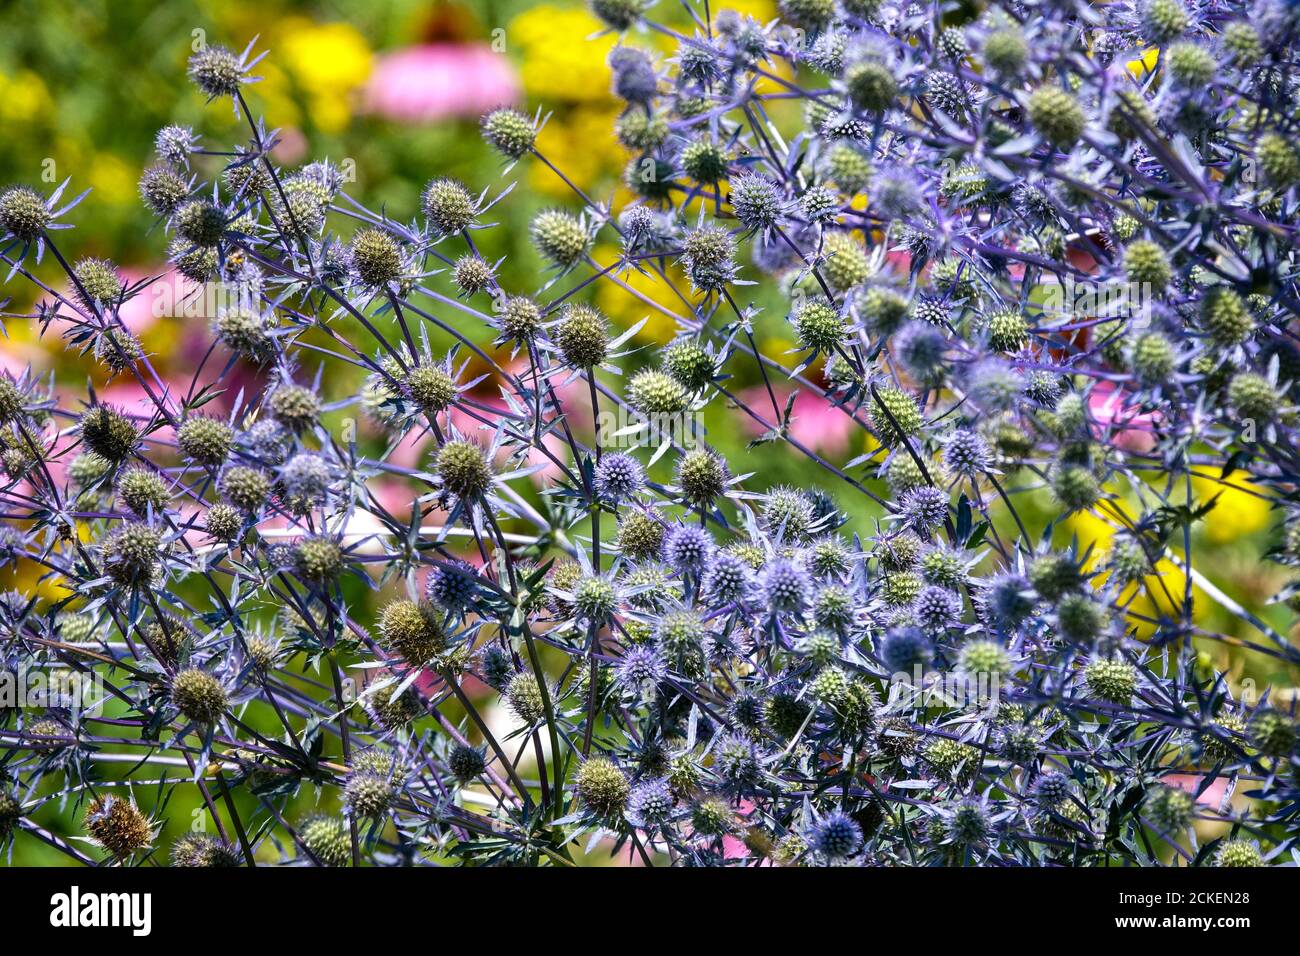 July flowers blue plant Sea Holy in a colorful garden bed, Sea holly, Eryngium tripartitum Stock Photo